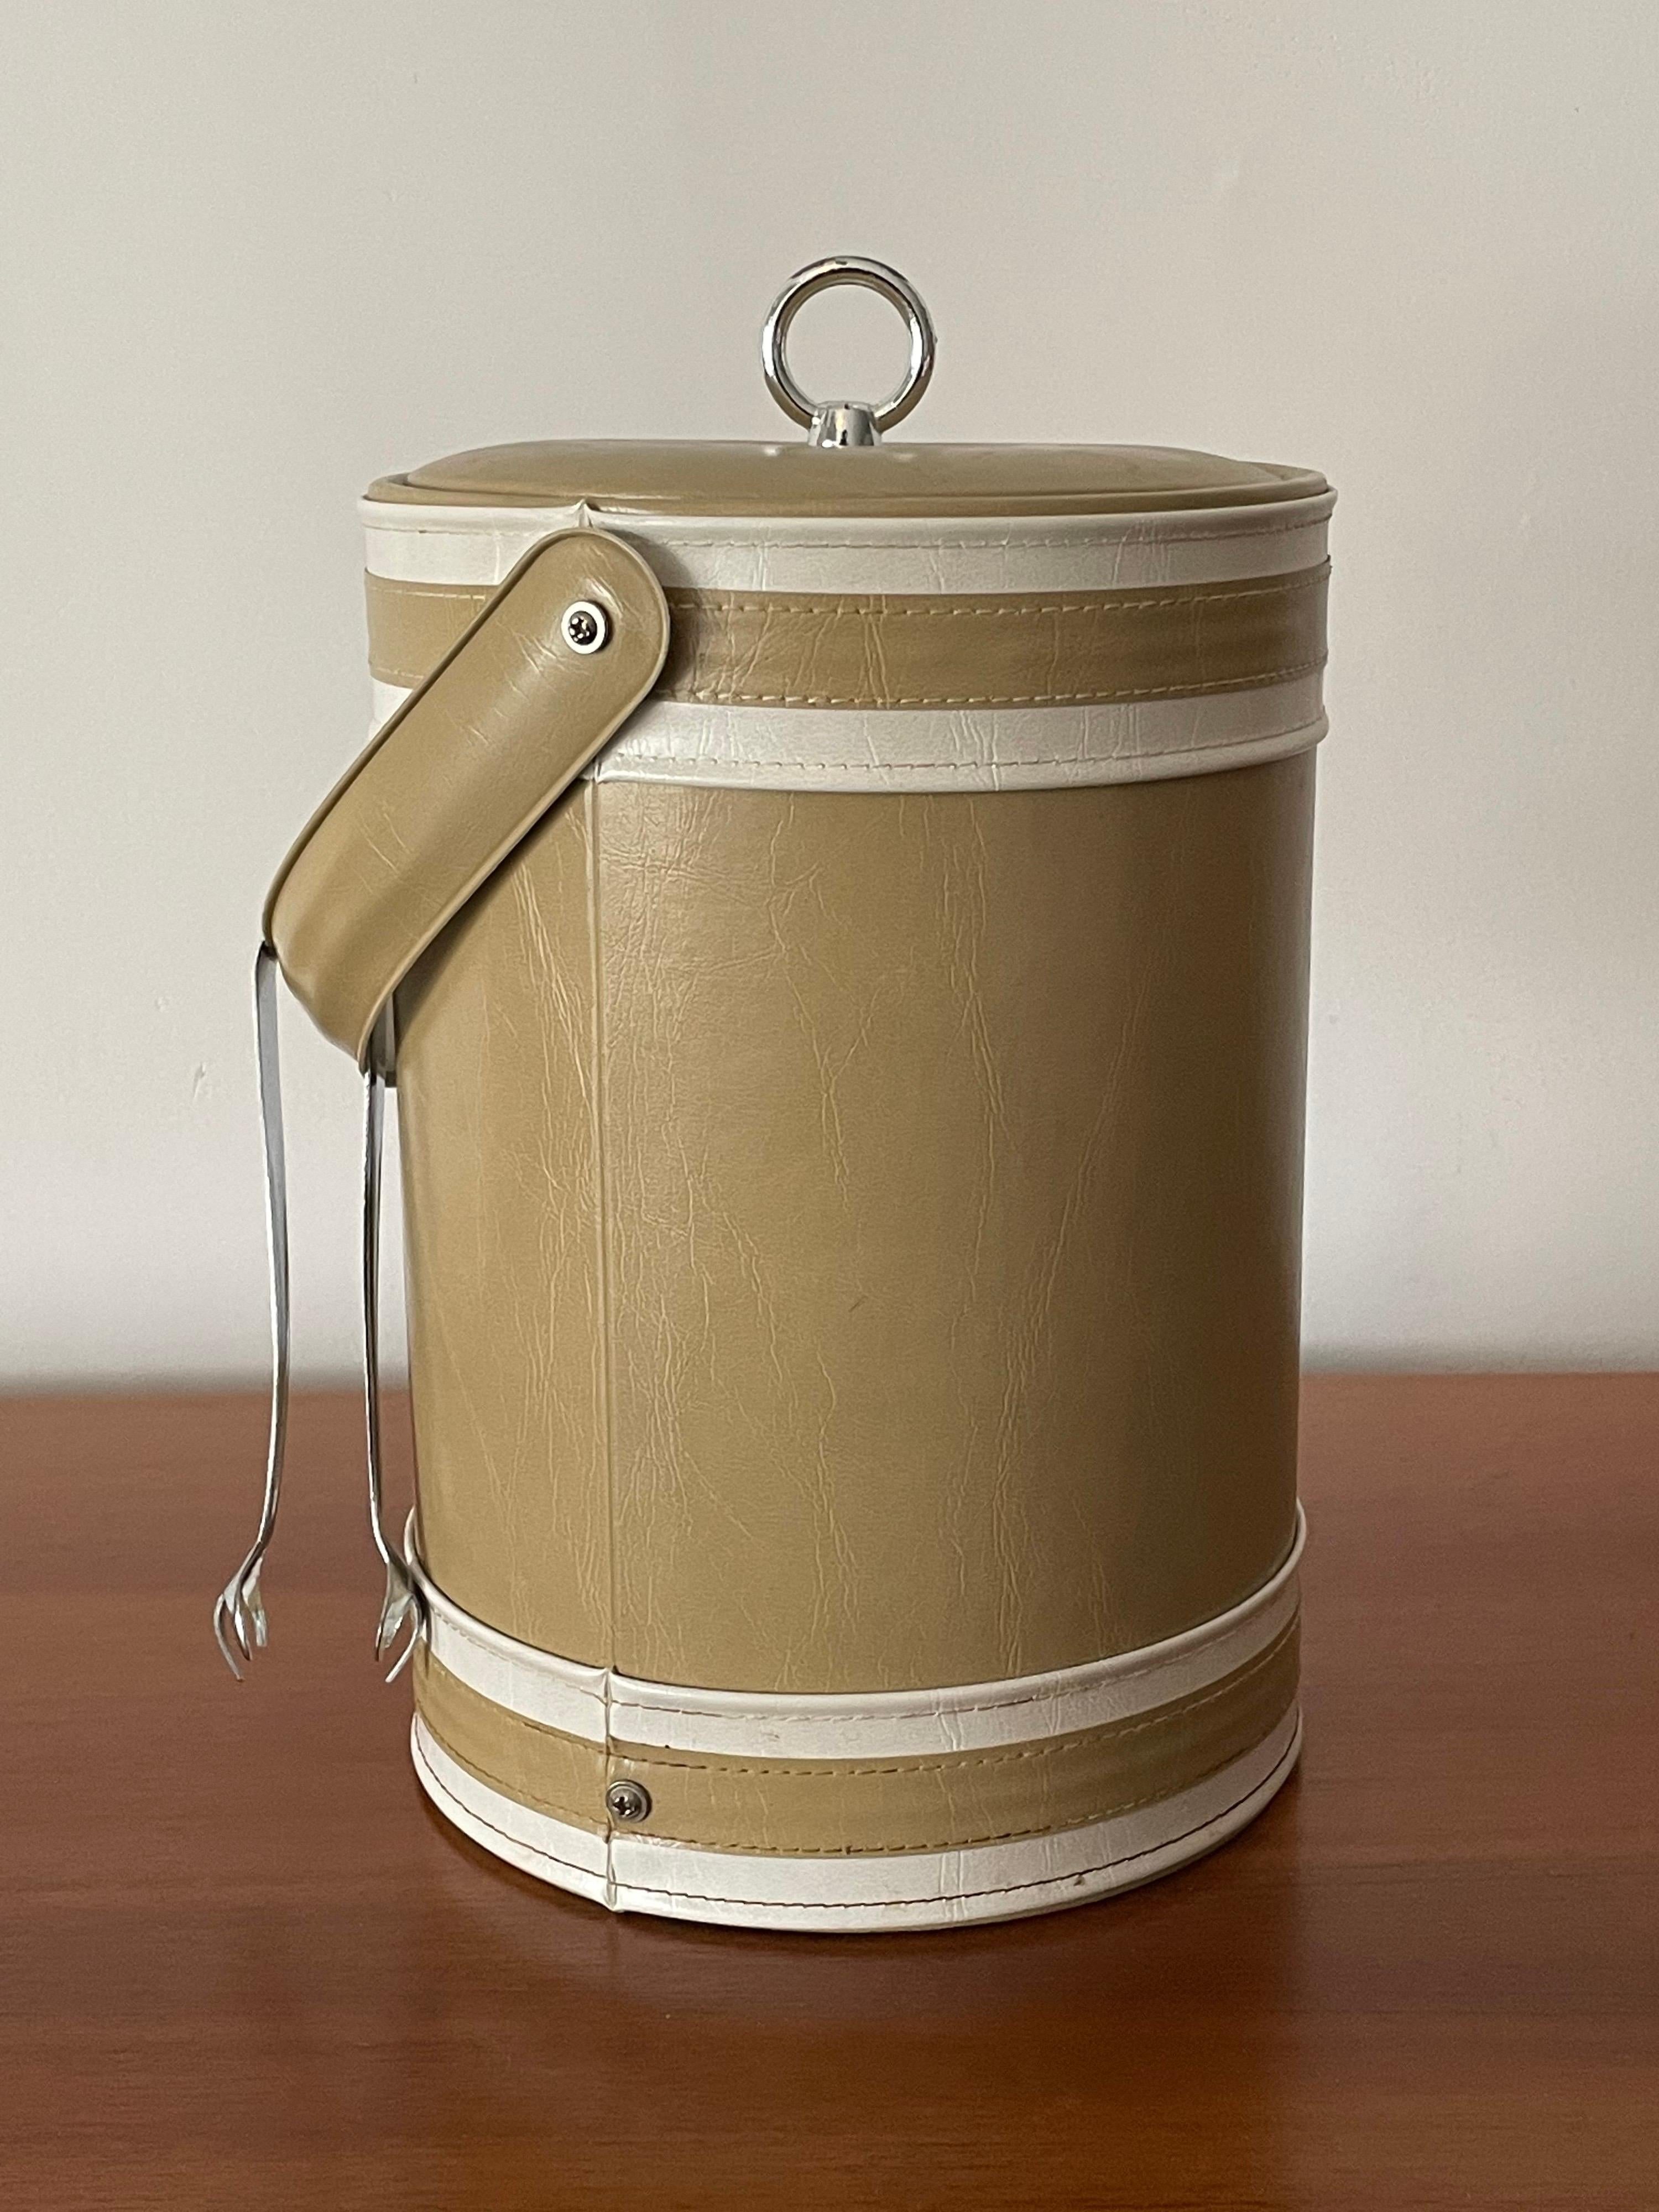 Unique faux leather ice bucket by Georges Briard. Very good original condition and ready for use.